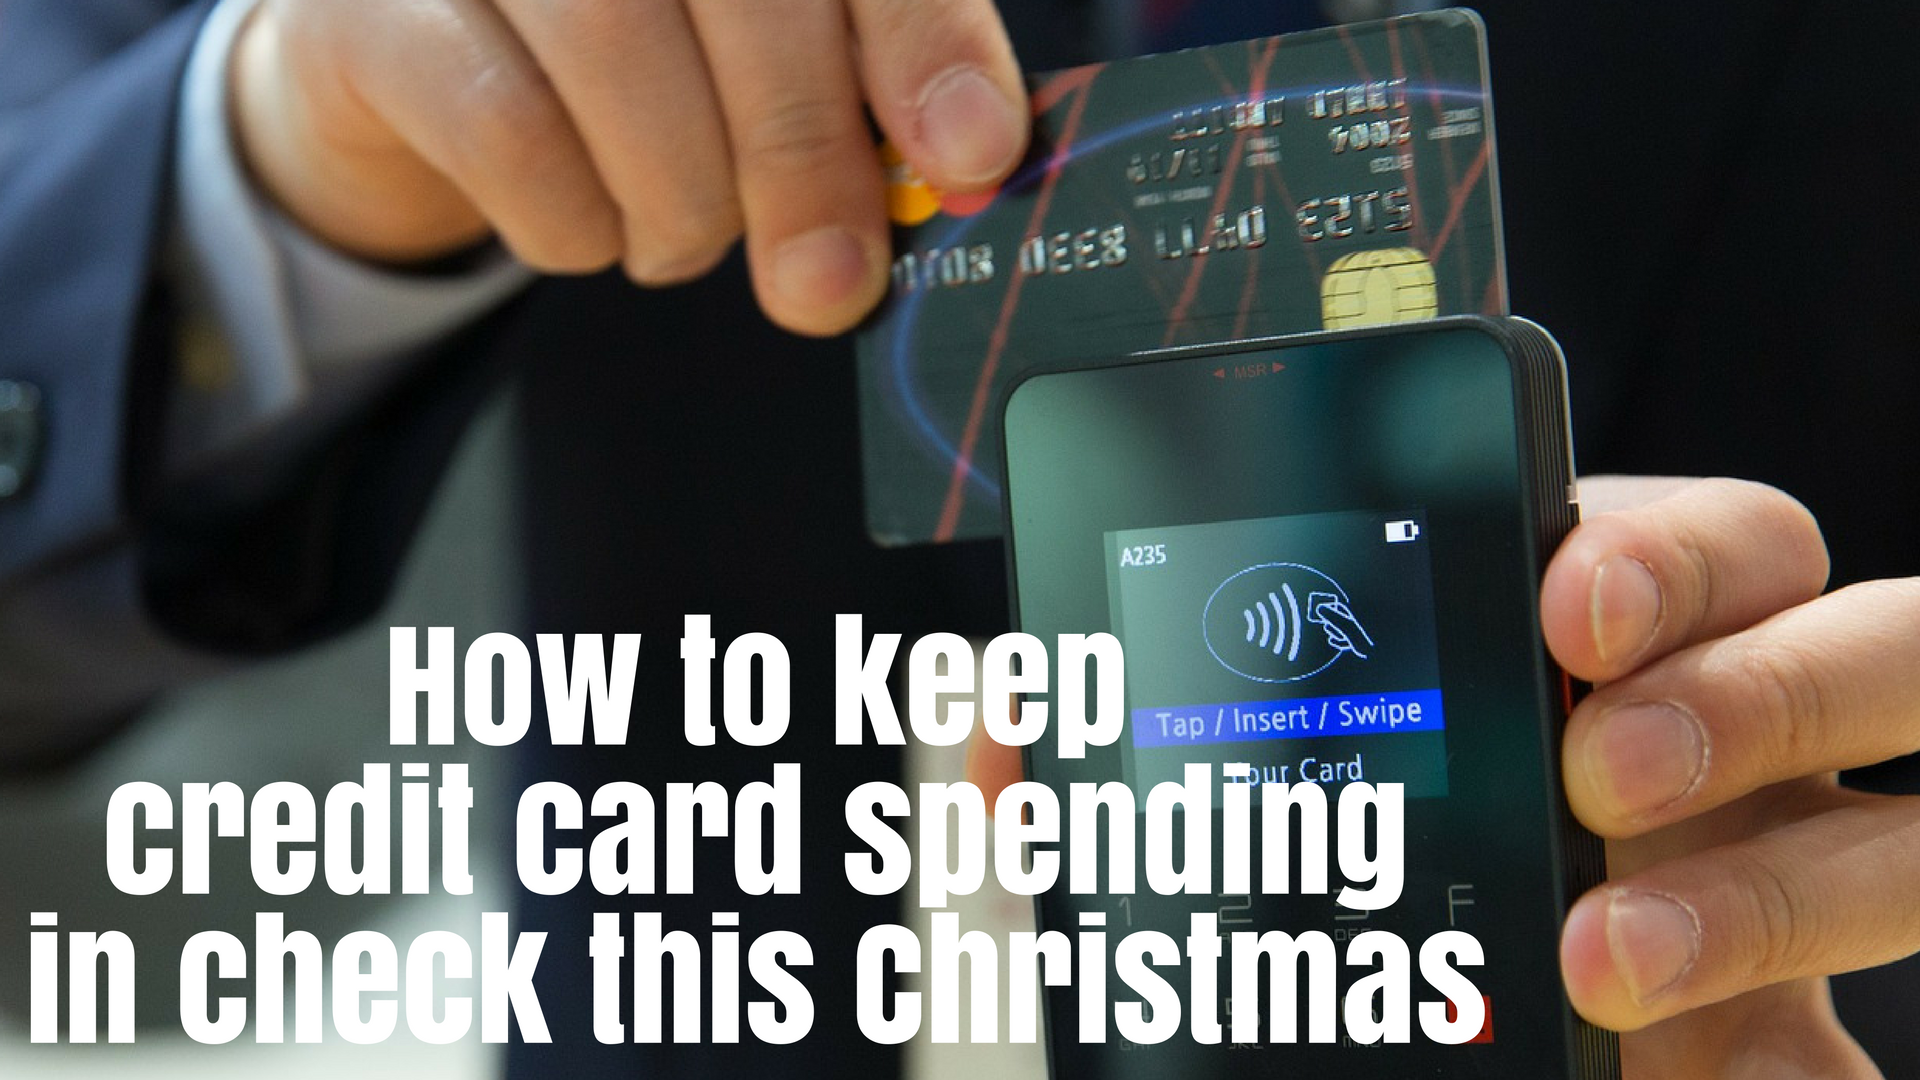 How to keep credit card spending in check this Christmas